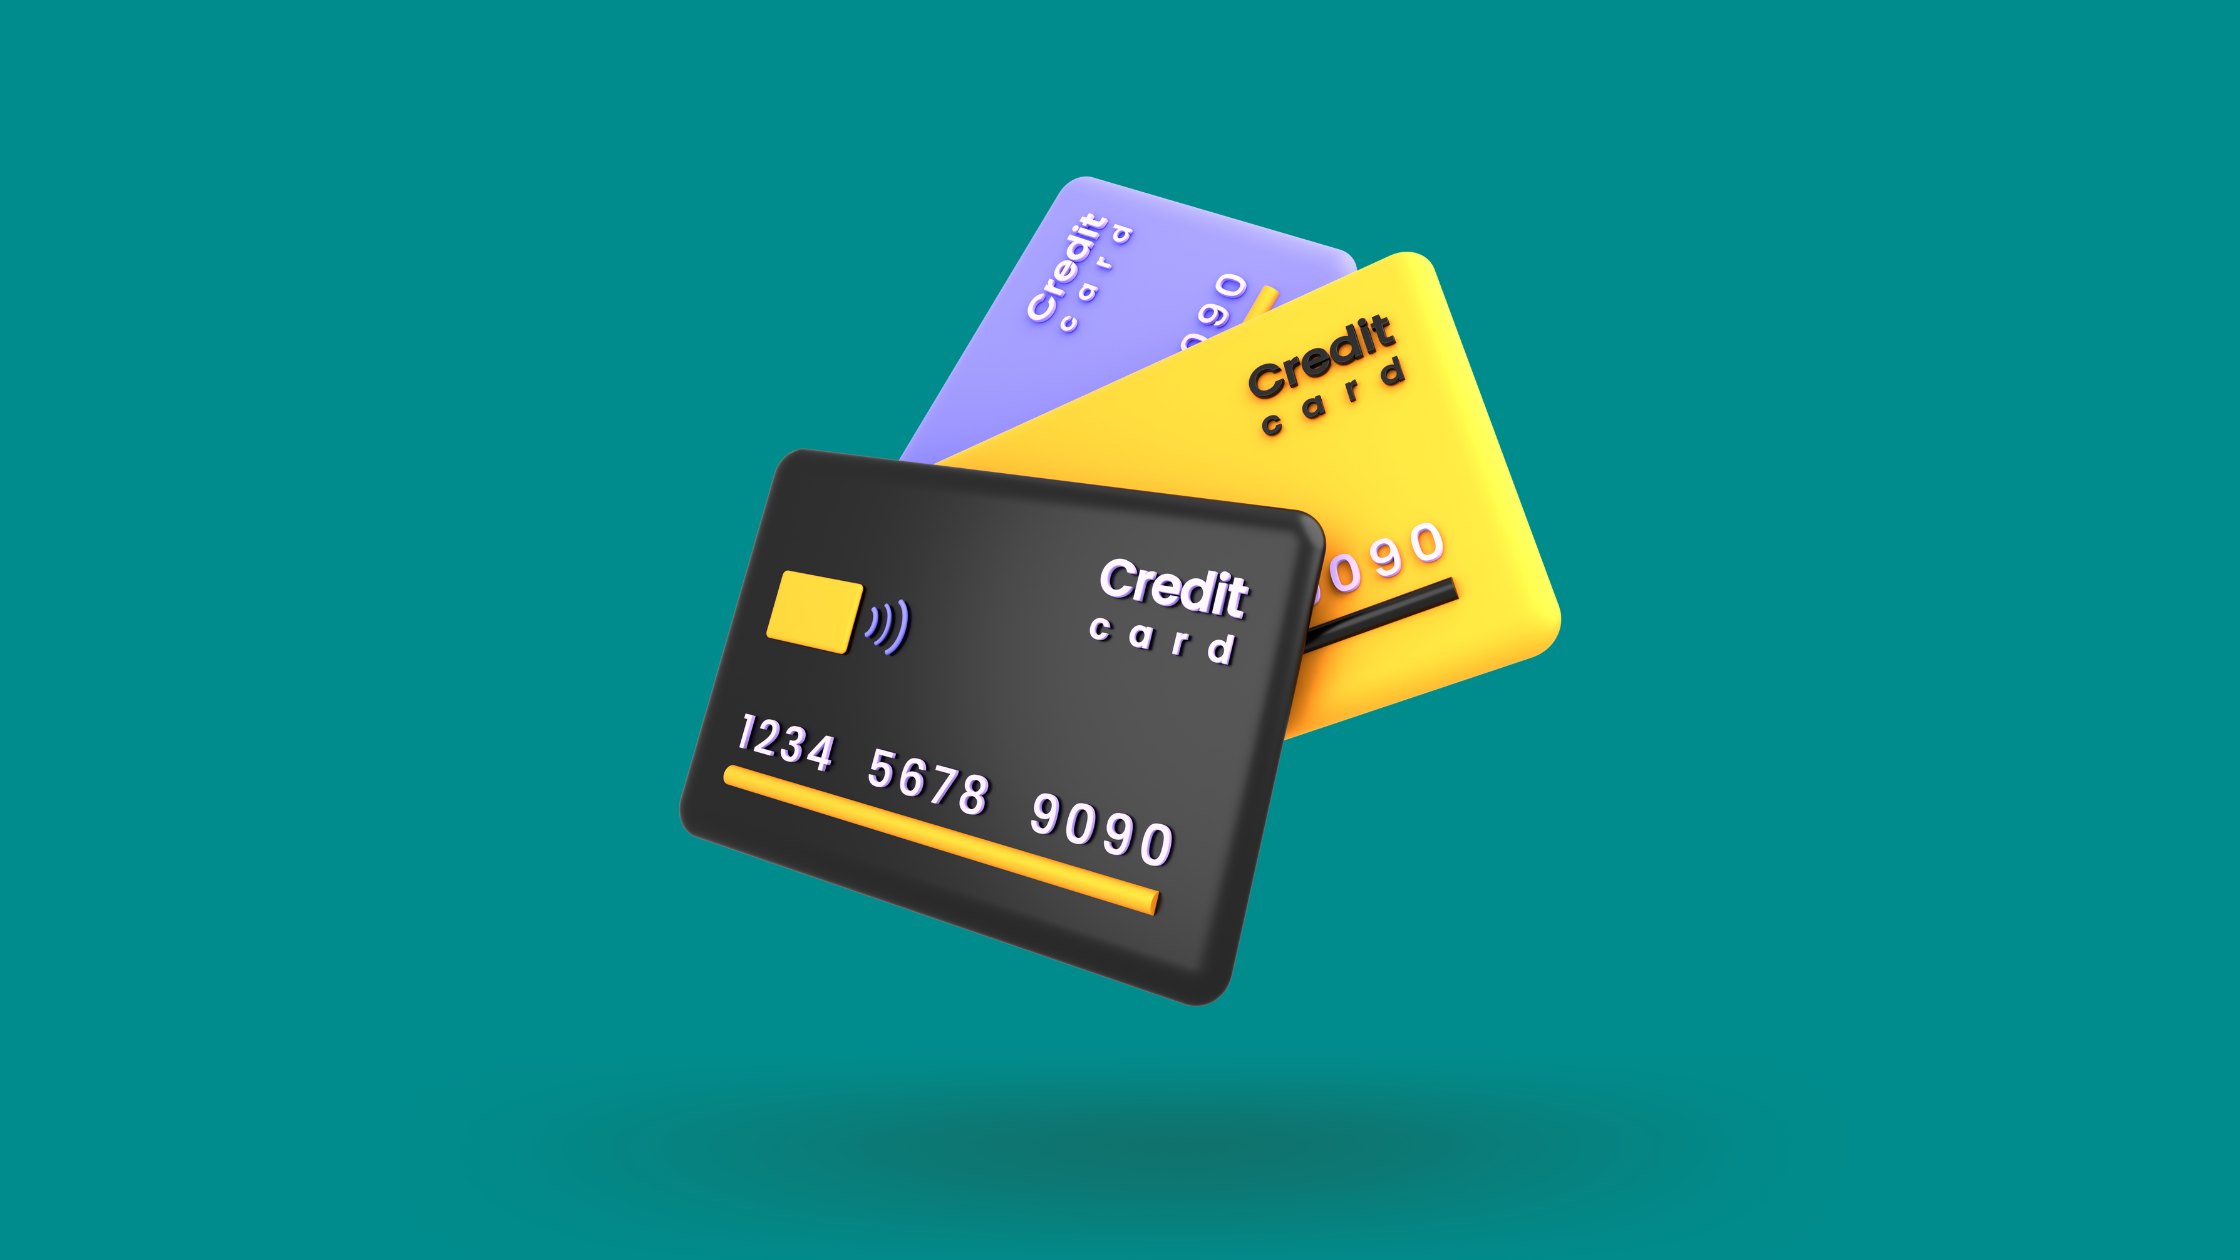 credit cards that work with crypto.com